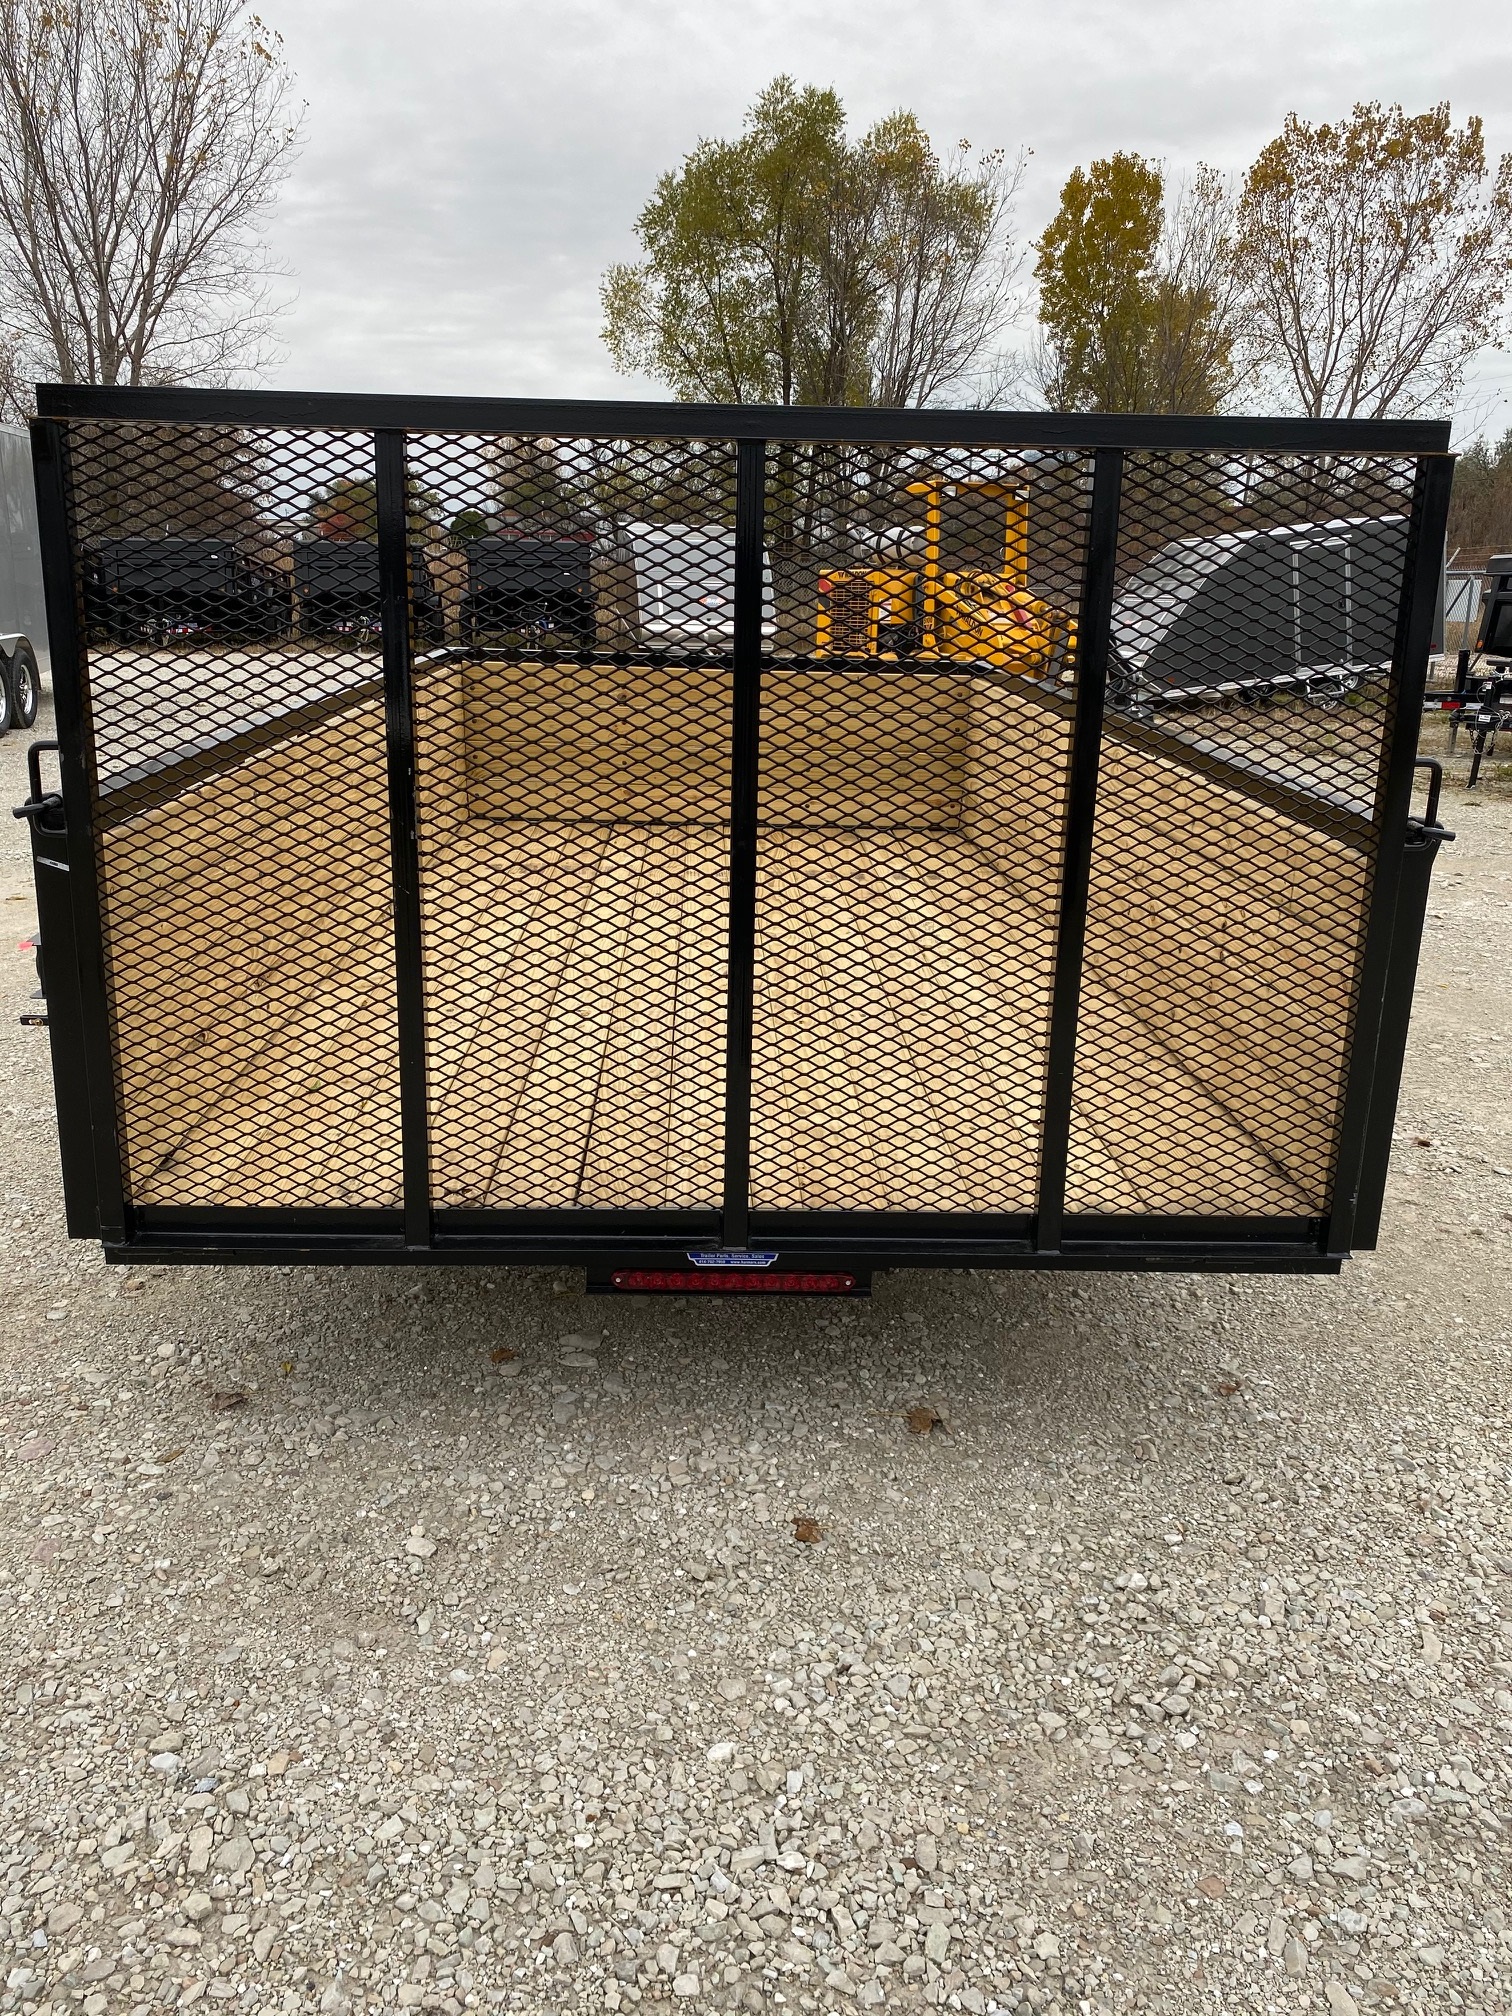 AMO 76in X 12ft Steel Utility Trailer with Ramp Gate